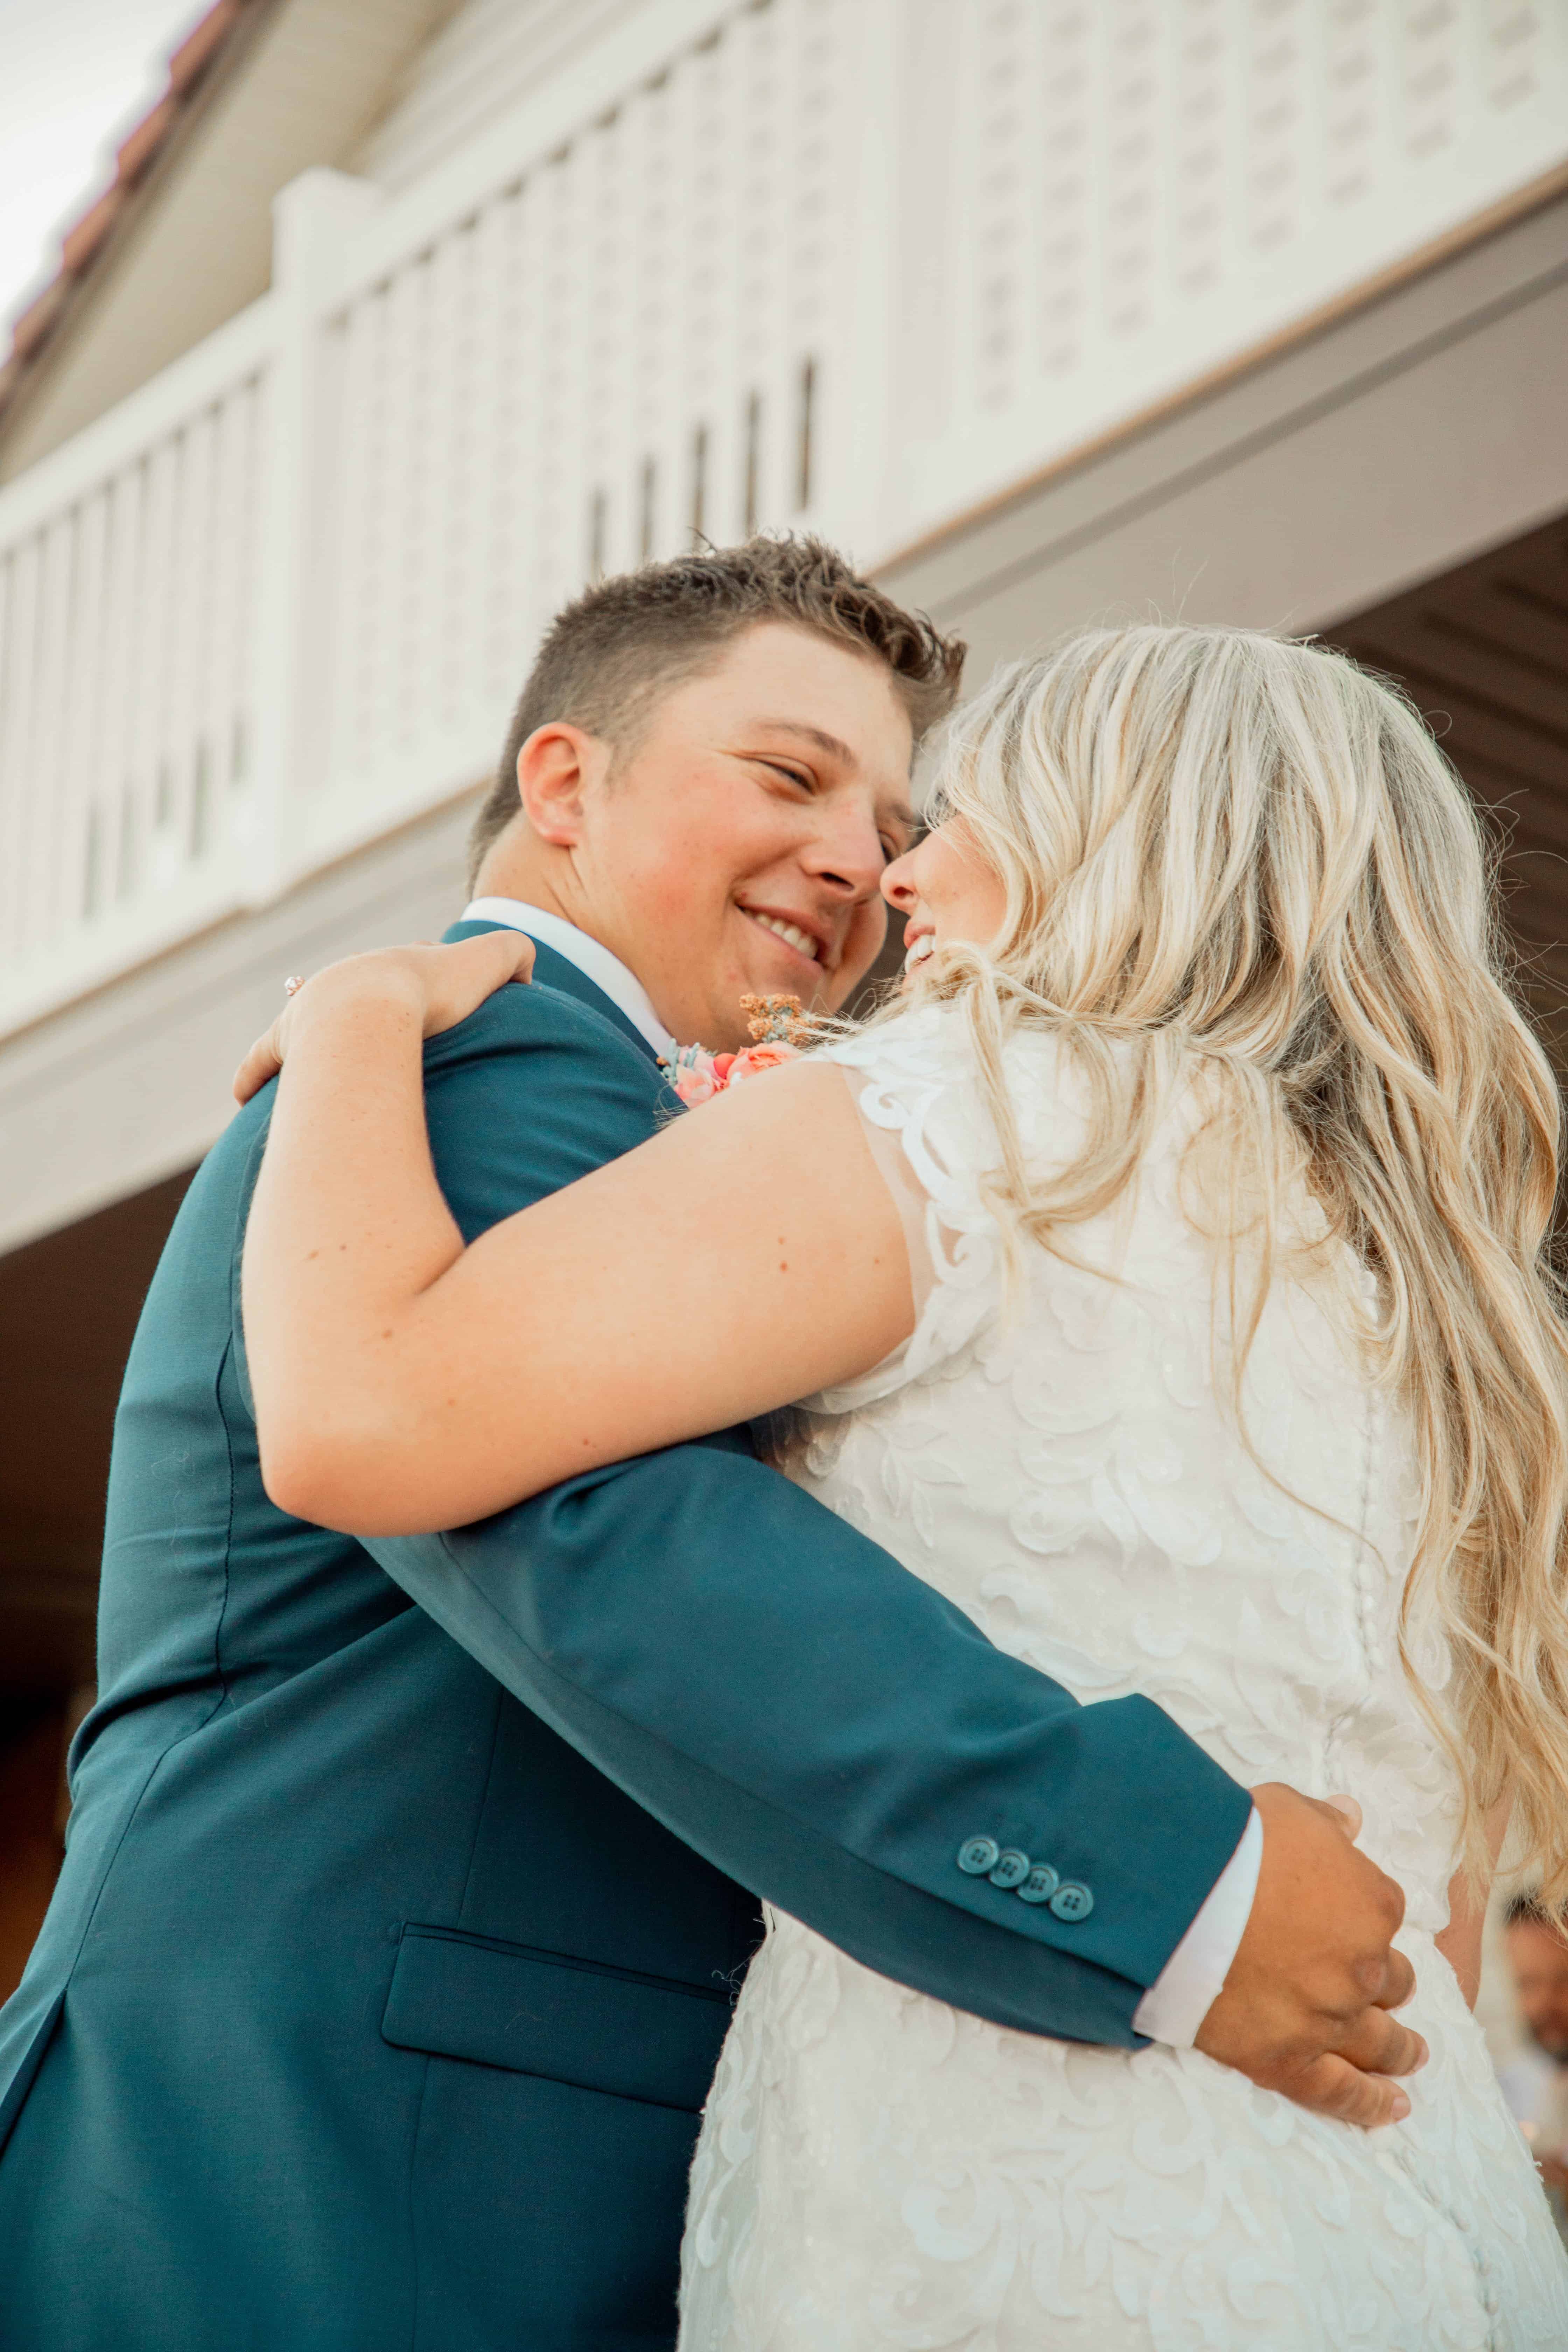 Free Groom and Bride Hugging and Smiling Stock Photo